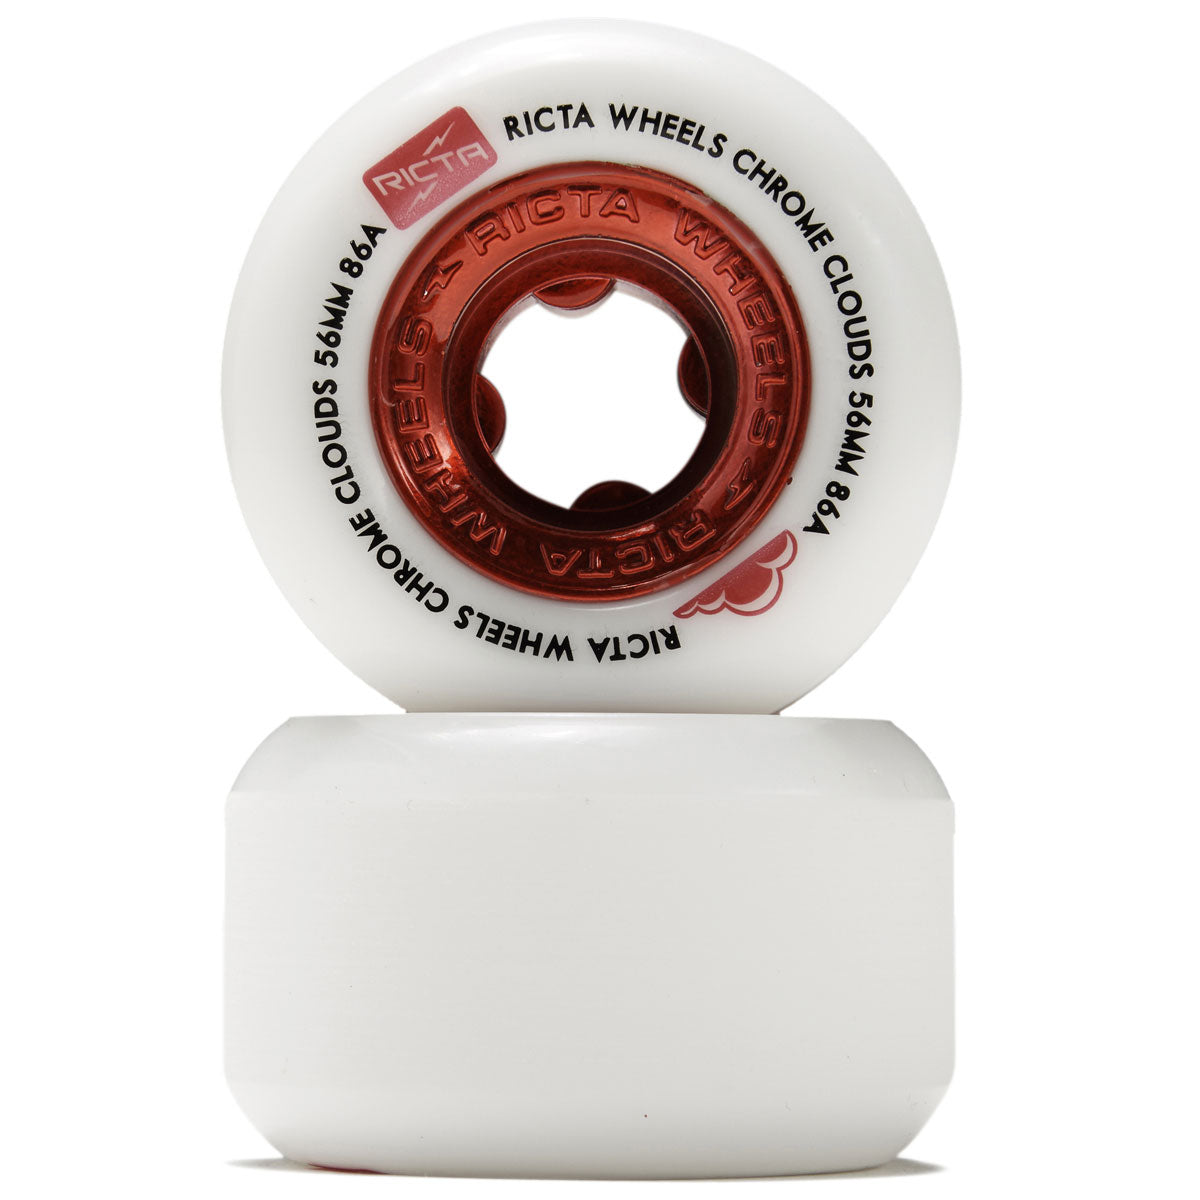 Ricta Chrome Clouds 86a Skateboard Wheels - Red - 56mm image 2